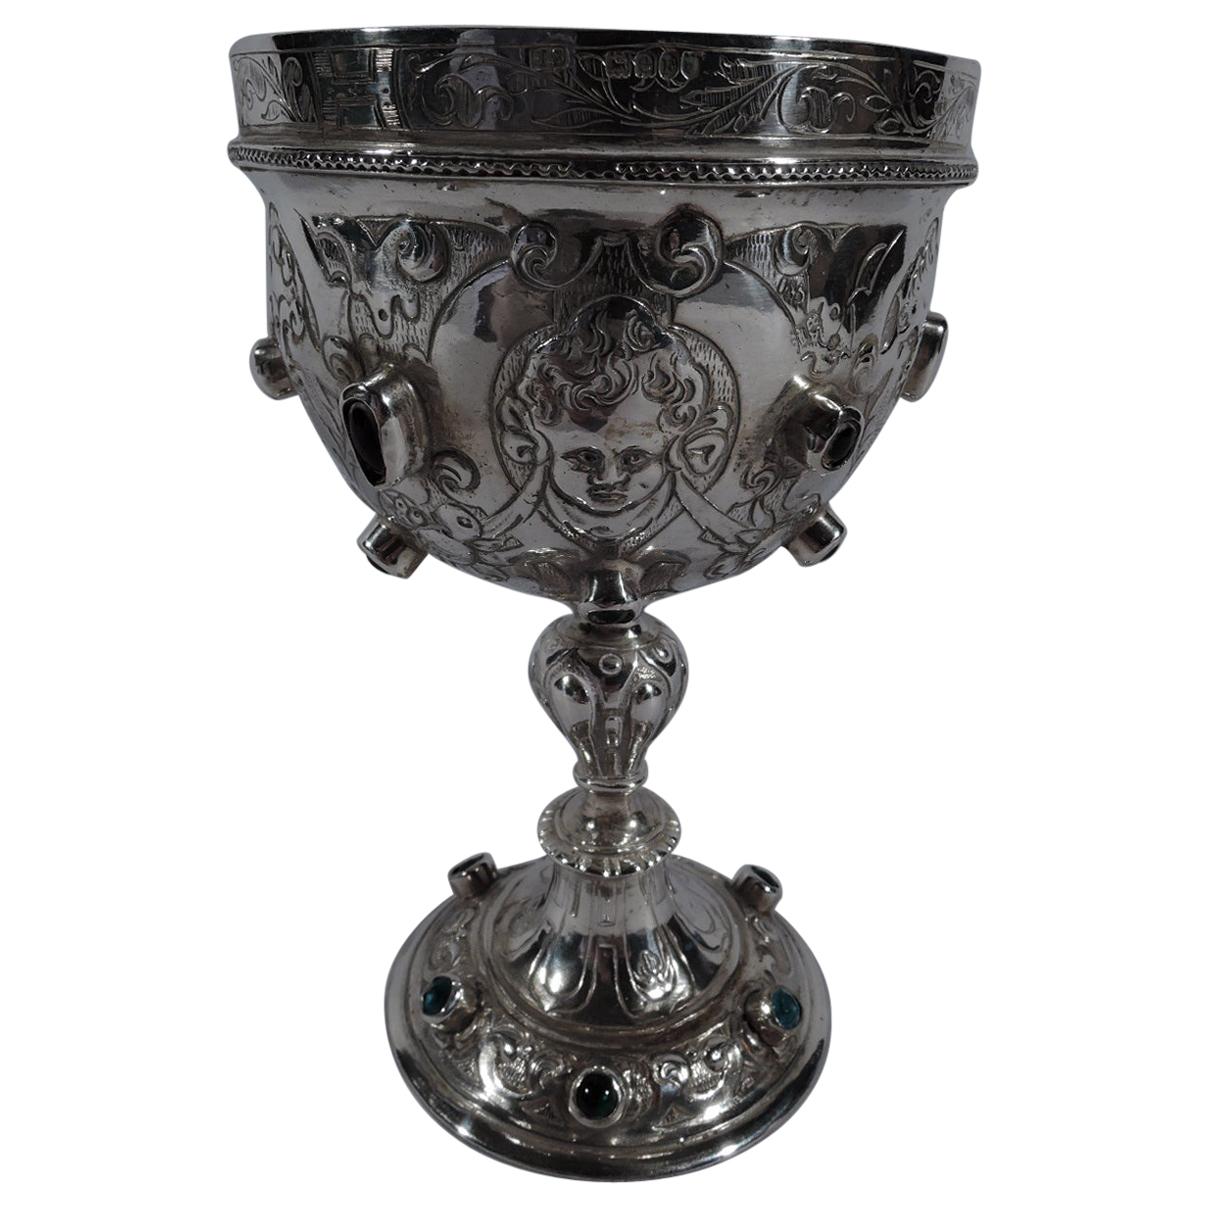 Antique Sterling Silver Jeweled Goblet with English Import Marks